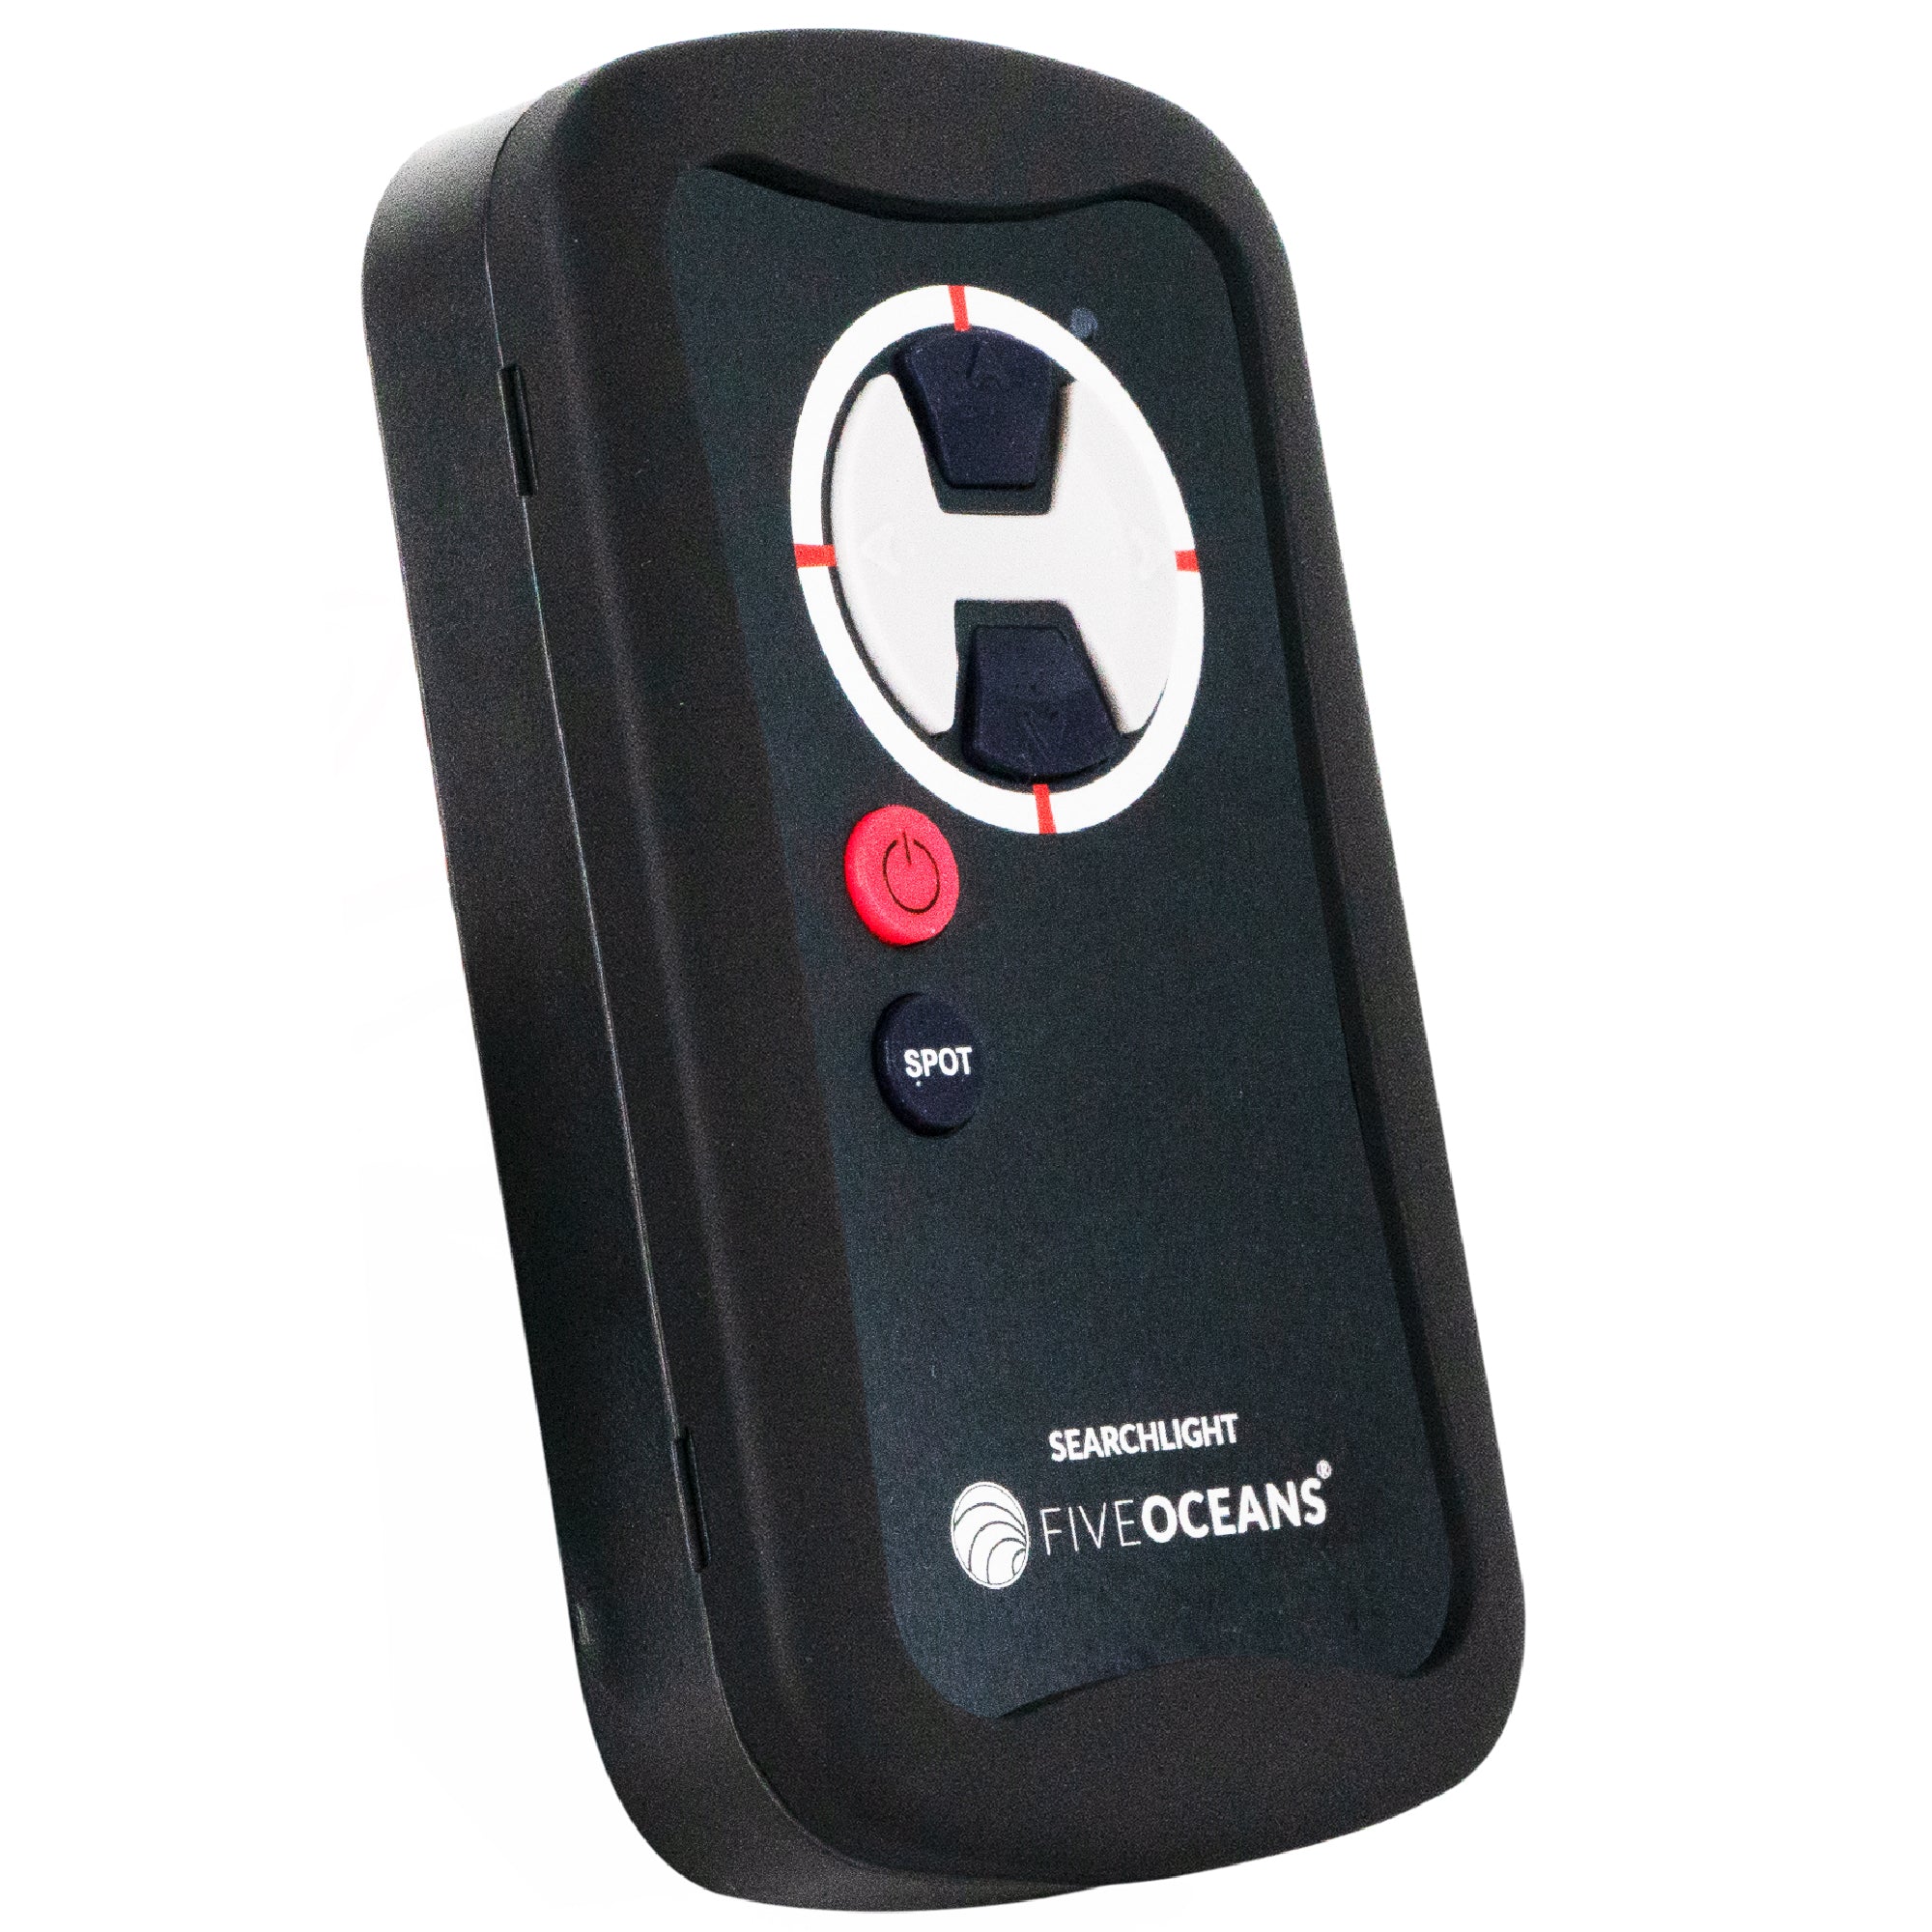 Second Station Wireless Remote Control 12V,  Compatible with Searchlight (FO4519) - FO4520